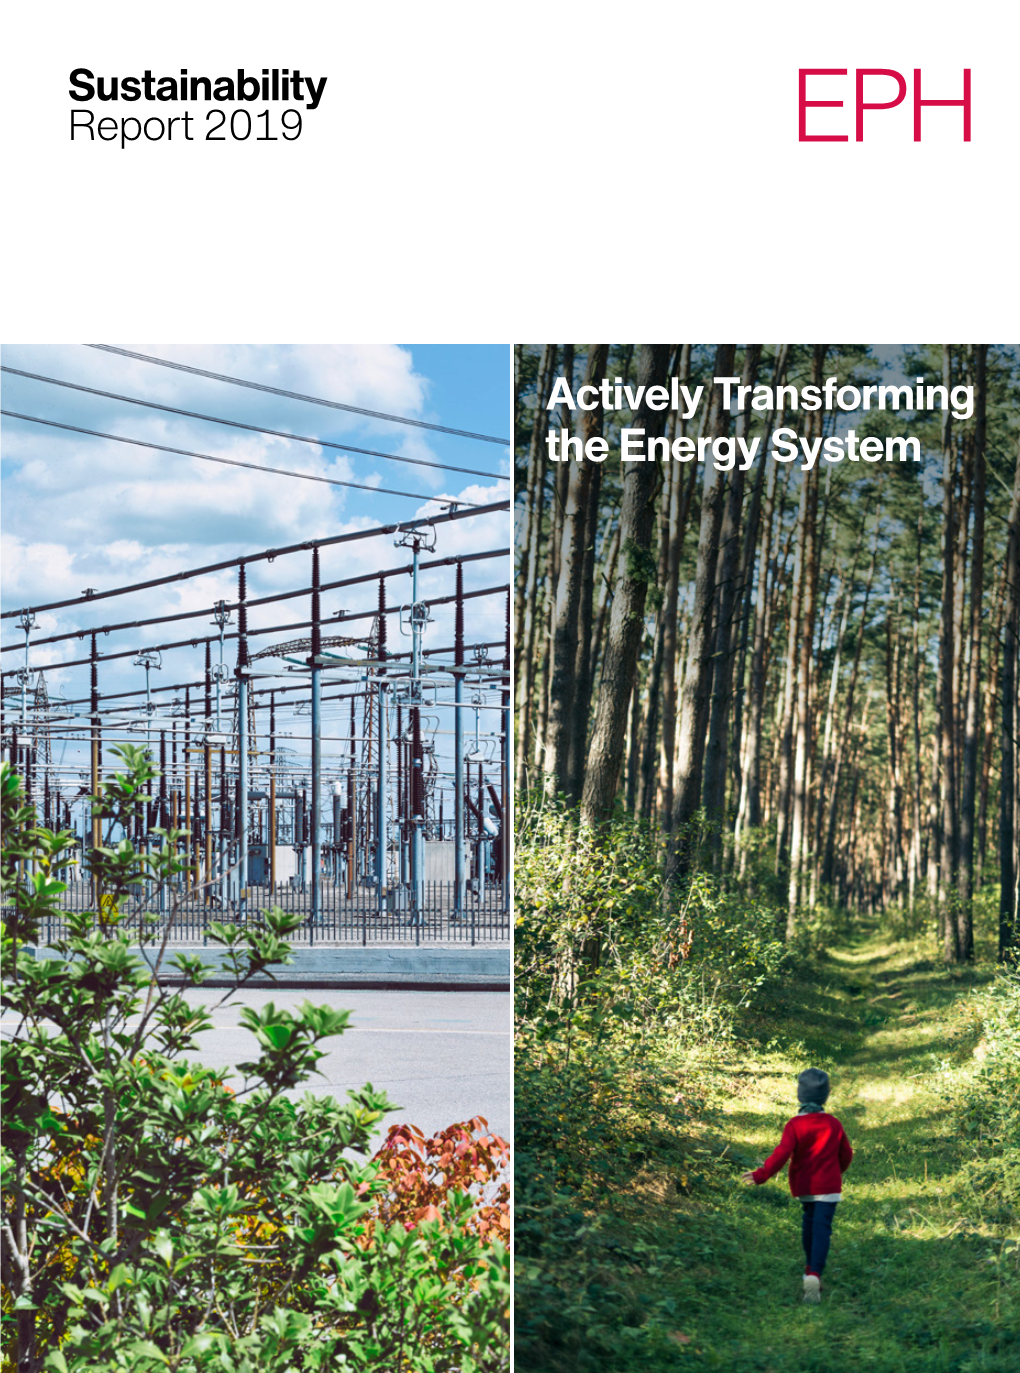 Actively Transforming the Energy System EPH Sustainability Report 2019 Contents Introduction 1 Materiality Analysis 4 Page 4 Page 100